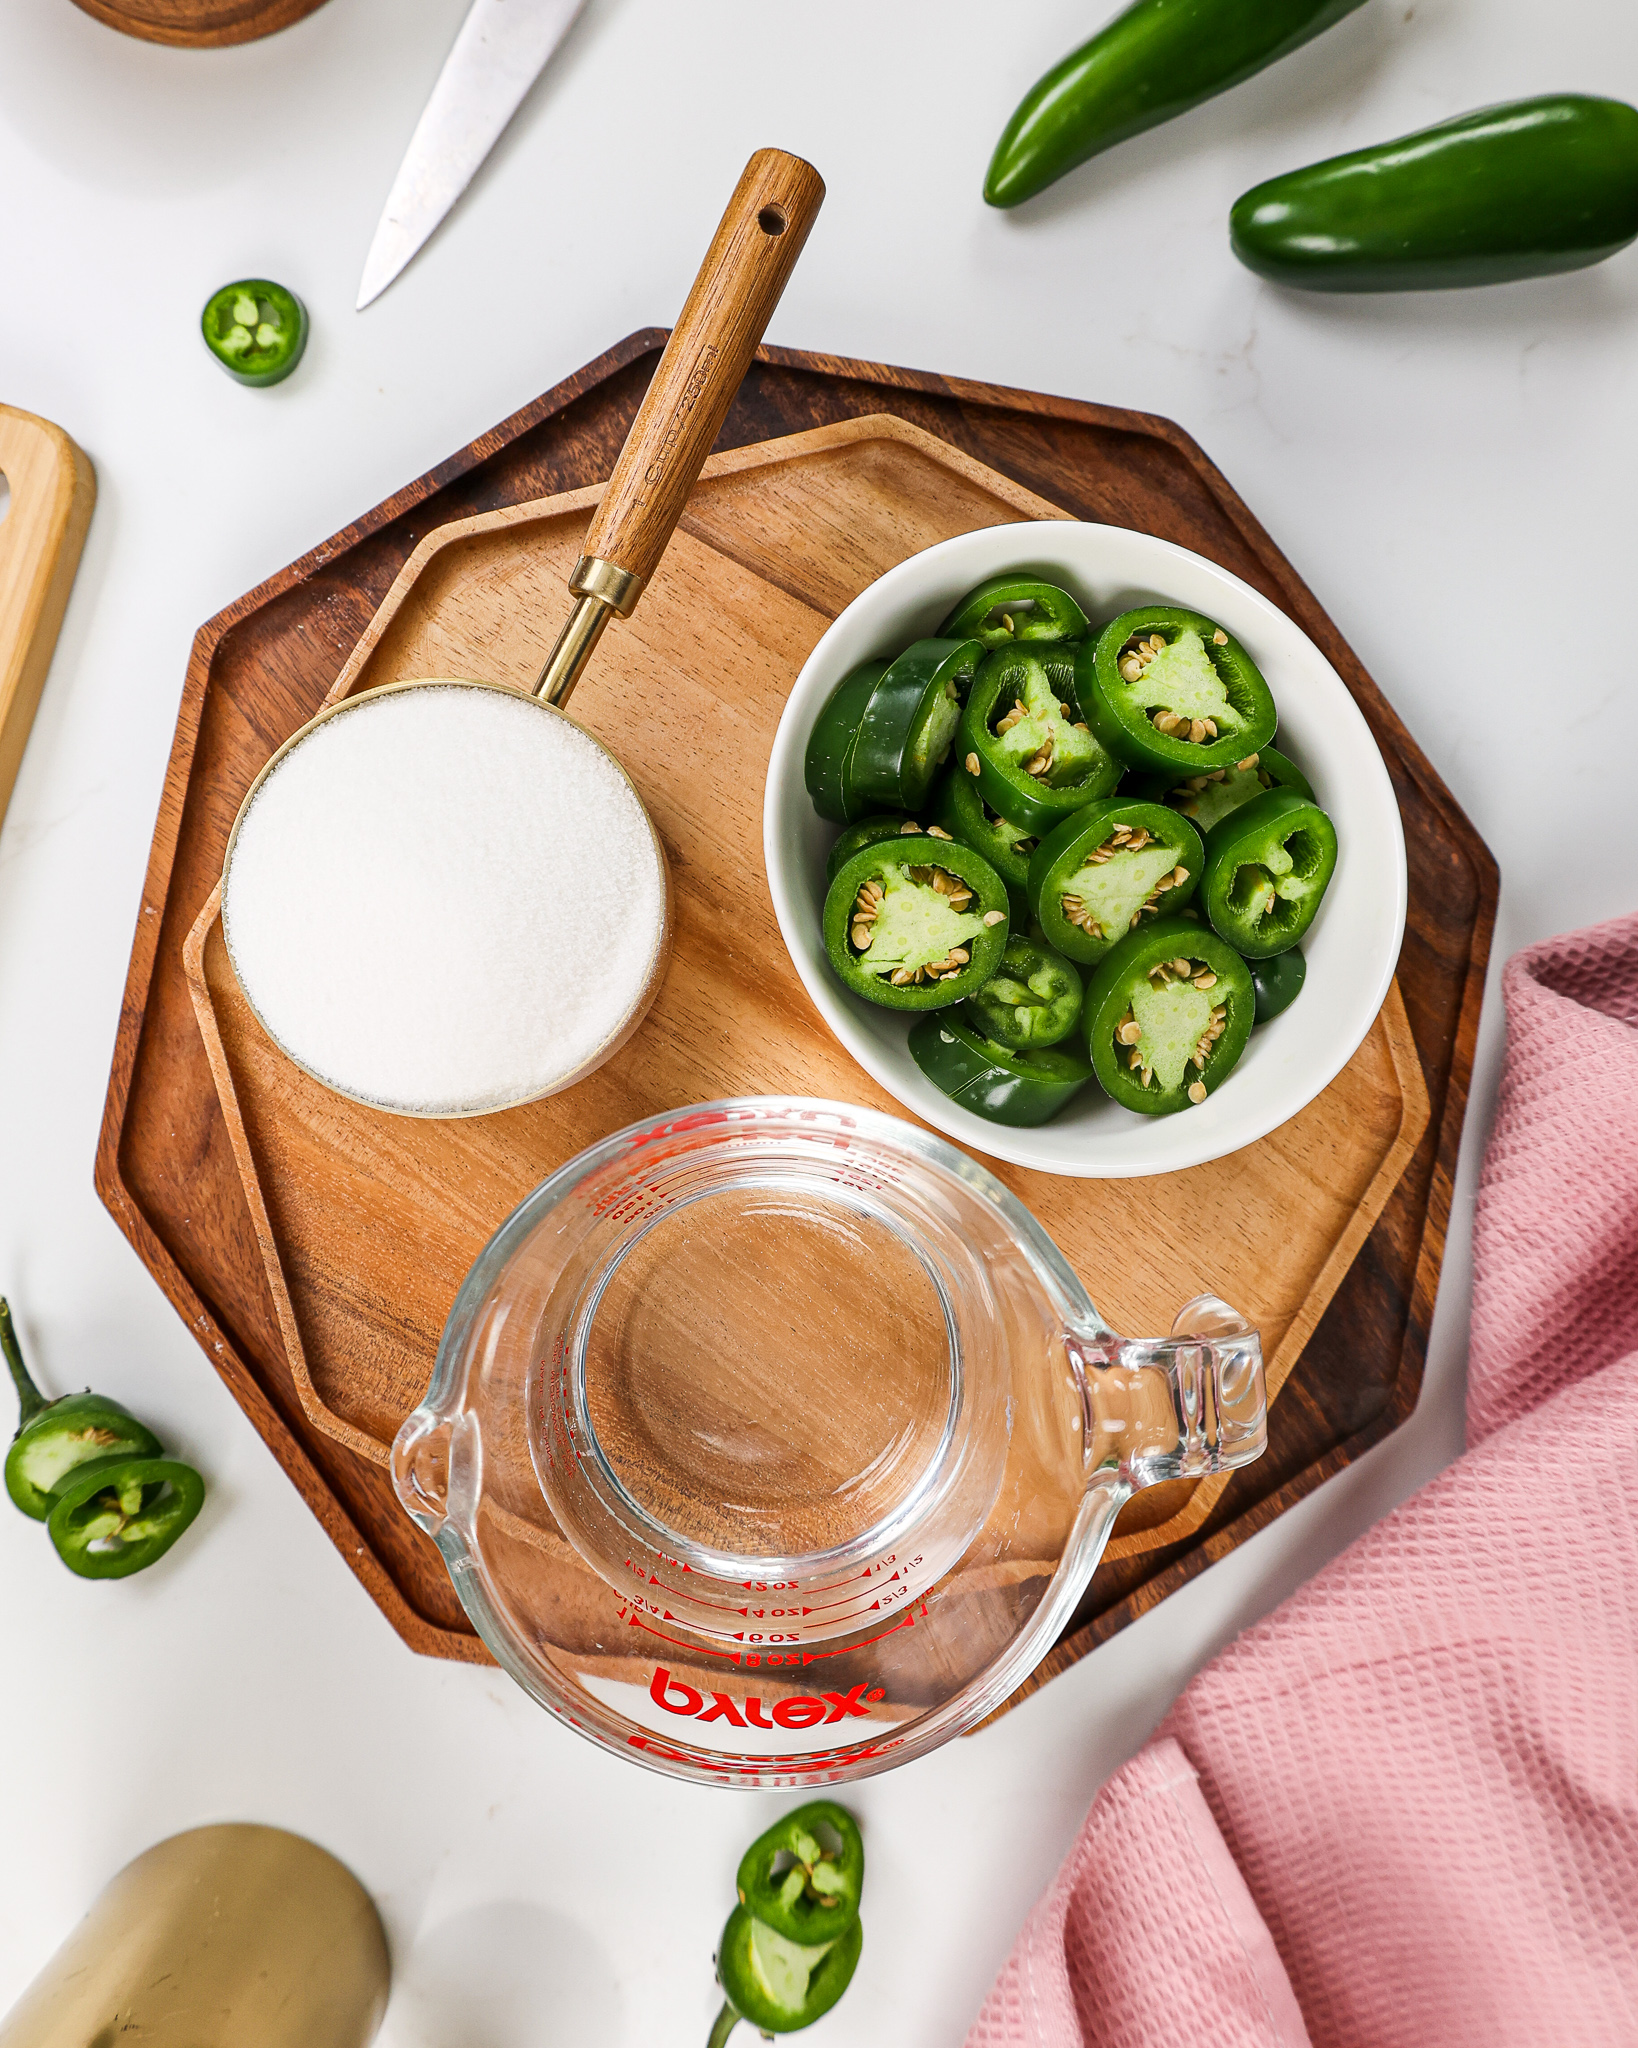 image of ingredients laid out to make jalapeno simple syrup